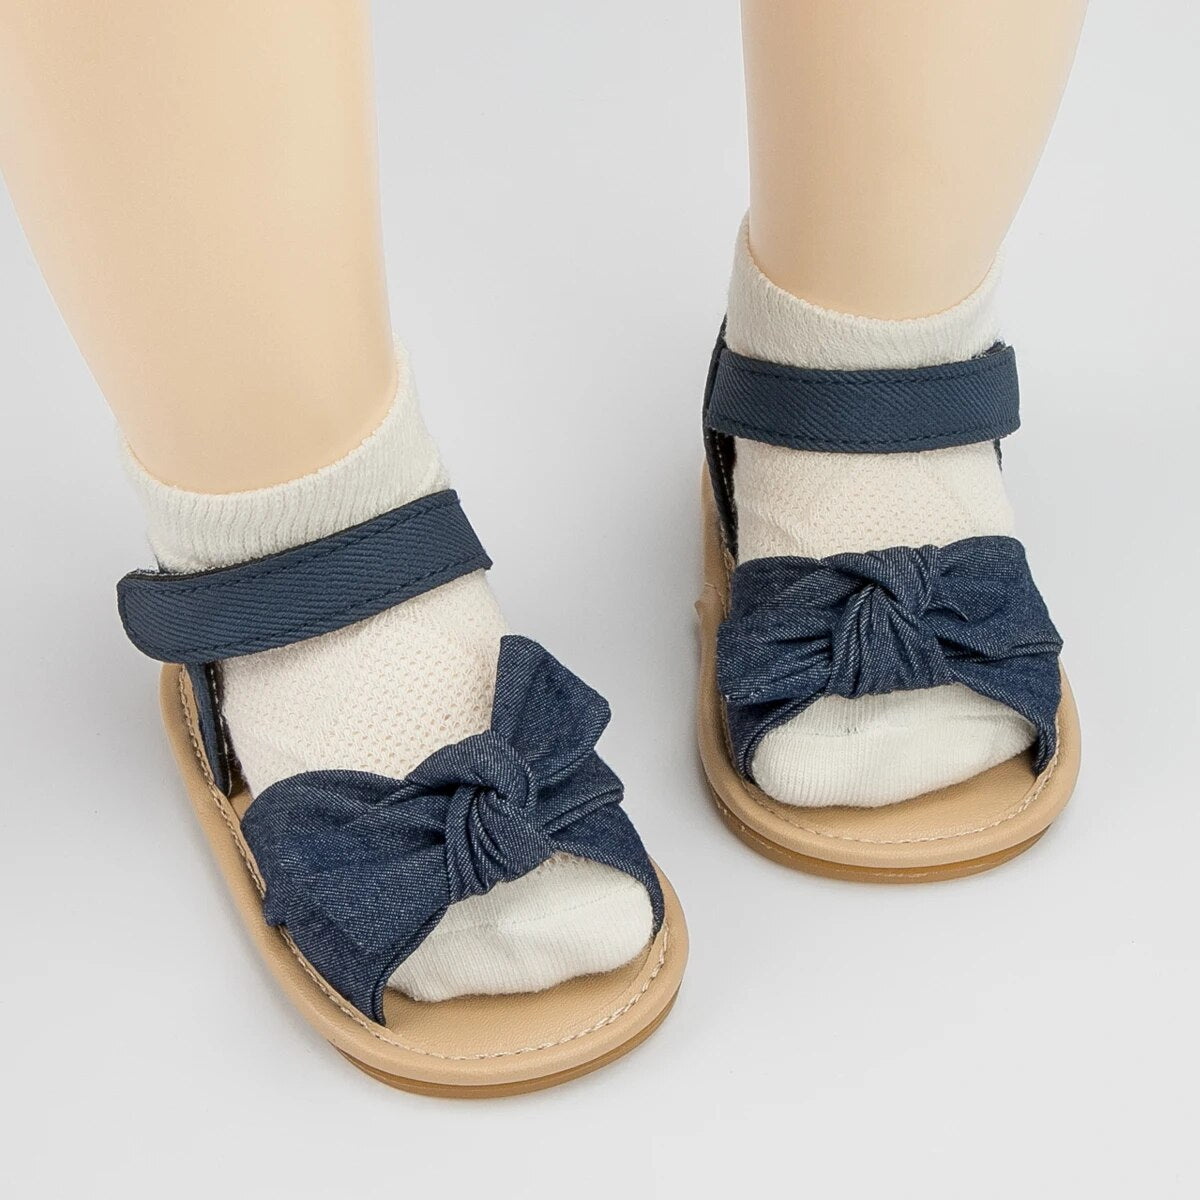 Baby Girl Summer Sandals Shoes Solid Anti-slip Soft Newborns Bow Classic First Walkers Infant Crib Shoes - BGSD50776